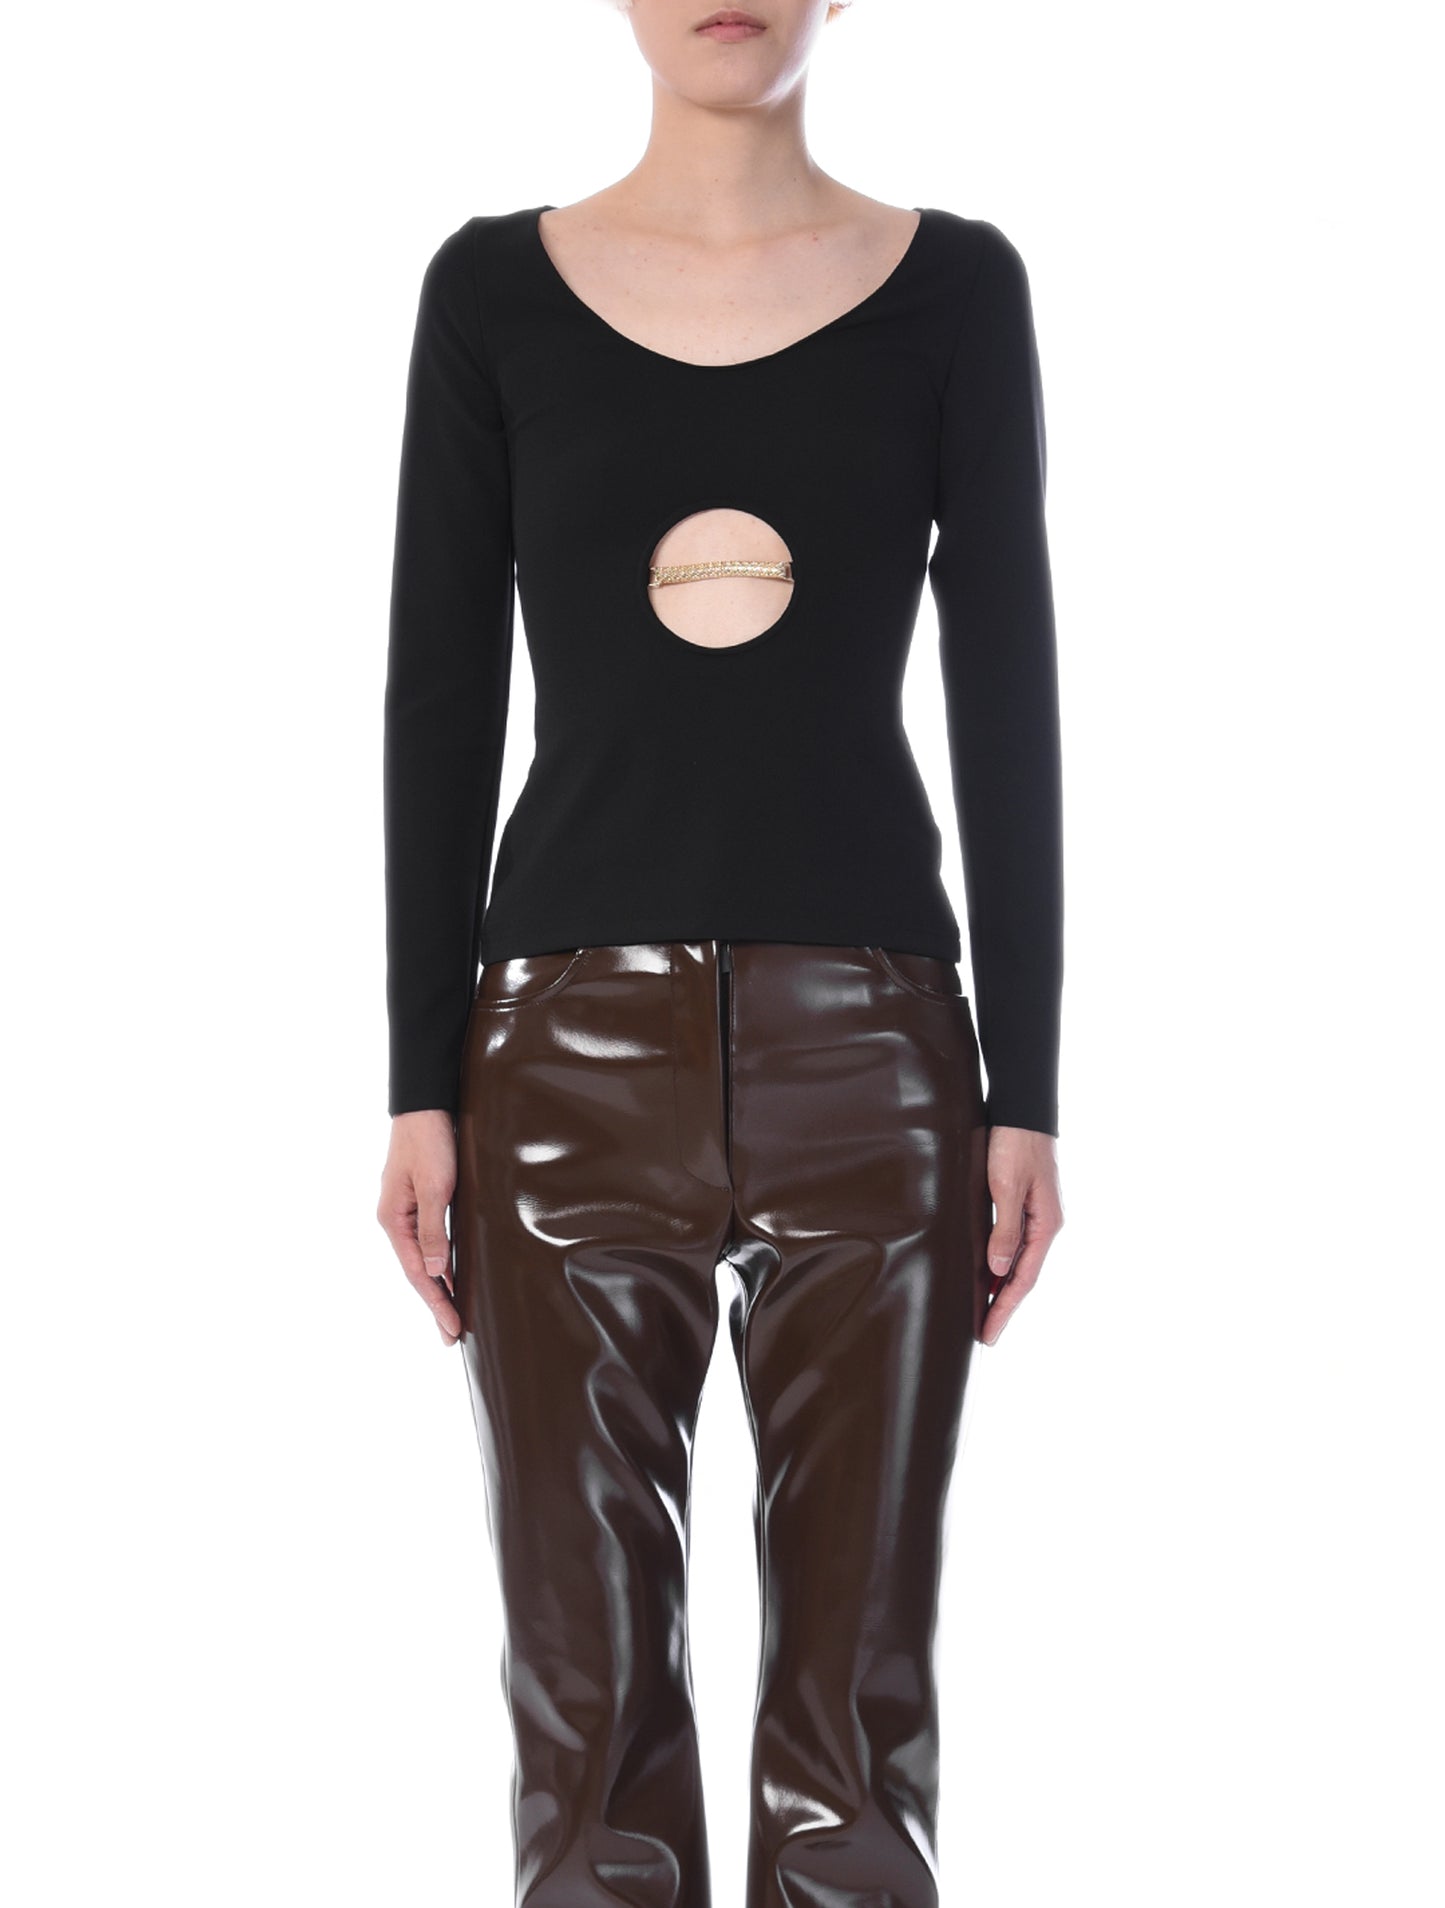 Christopher Kane Cut Out Chain Top